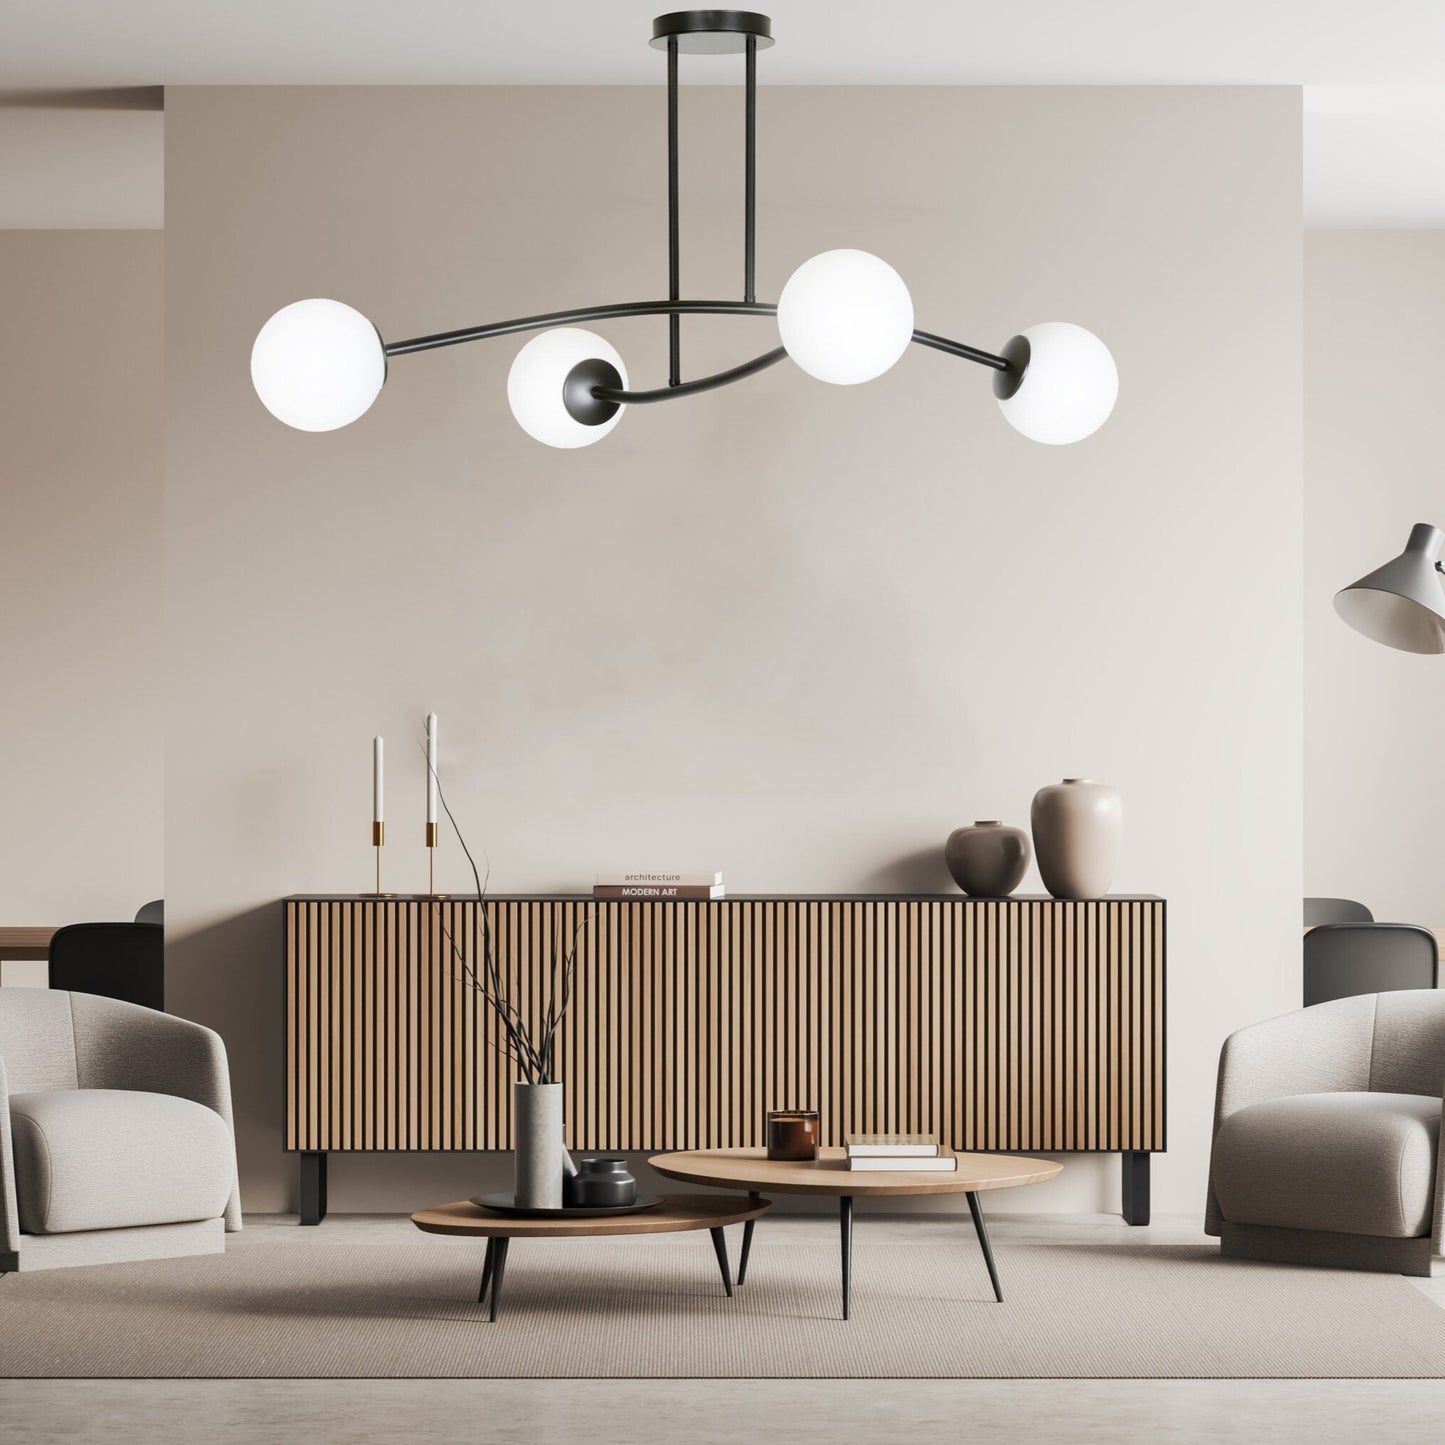 HALLDOR  is a series of modern lamps that will be a perfect complement to modernist interiors. However, they will also work perfectly in more traditional spaces. The minimalist HALLDOR lamp perfectly illuminates even large surfaces and fits perfectly into most home arrangements.